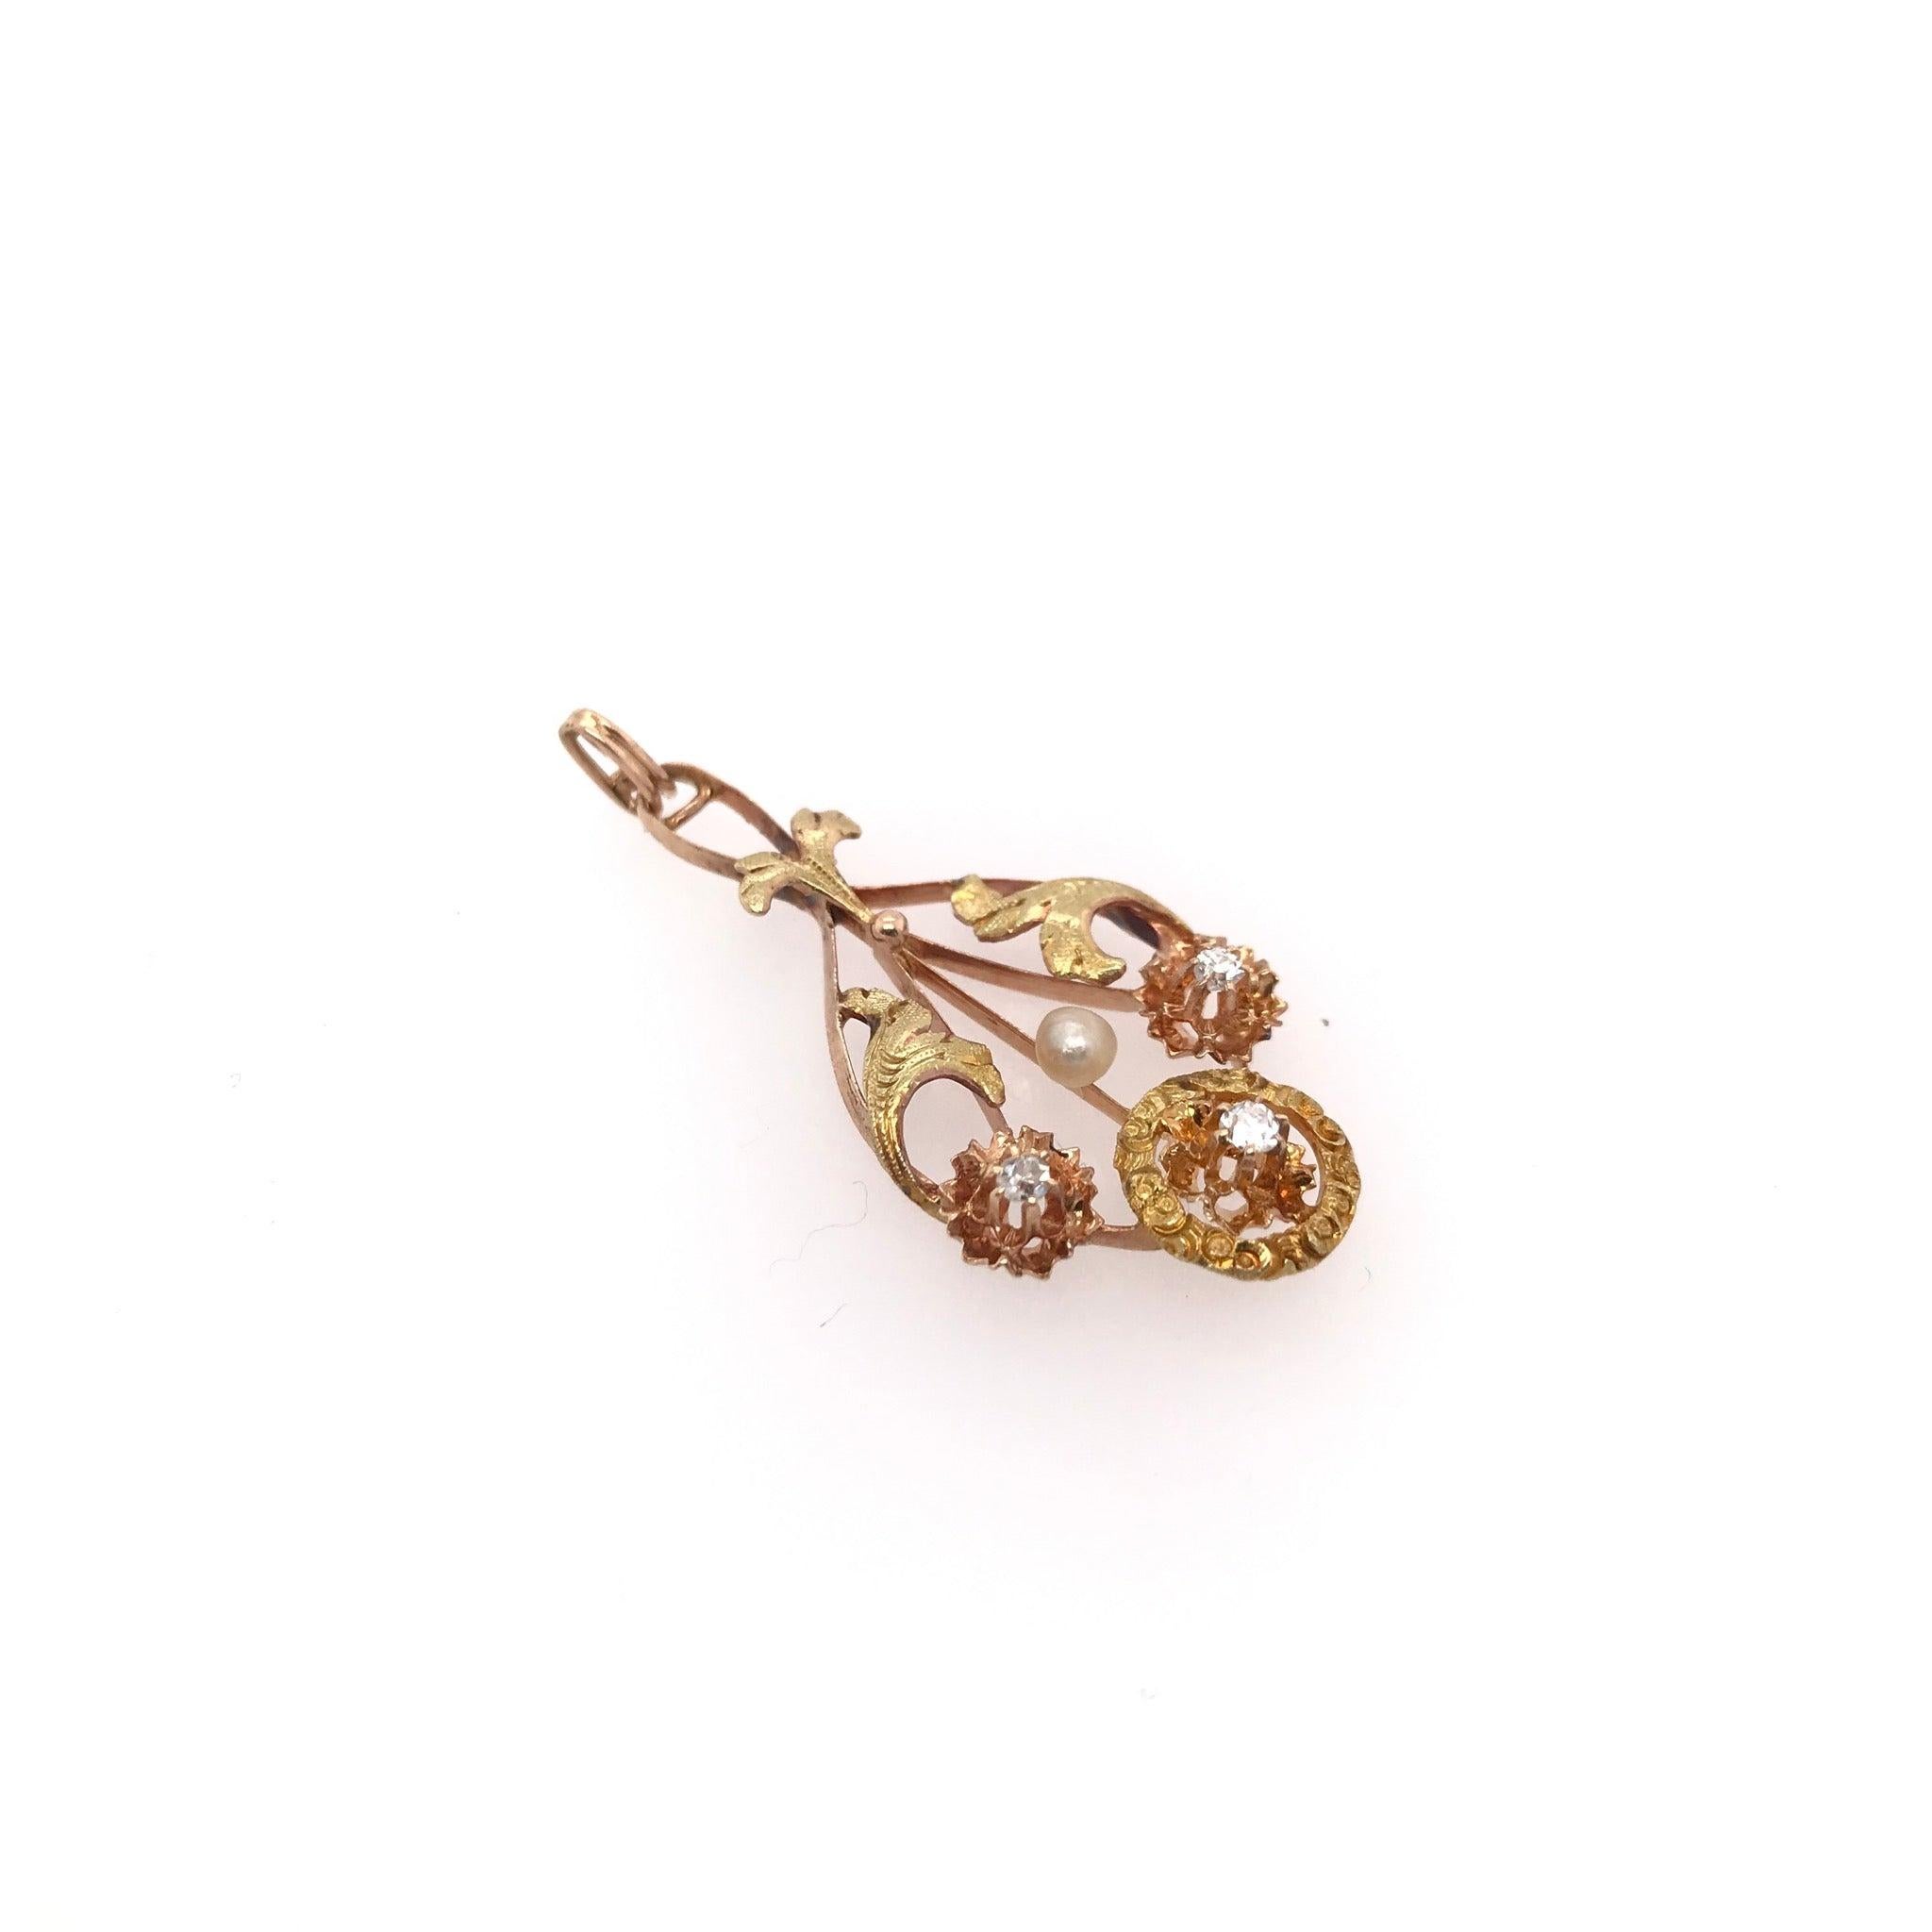 This antique Lavalier style pendant was handcrafted during the Victorian Era ( 1840's-1900 ) The pendant is crafted from 14k victorian rose gold. This antique piece has charming 14k green gold floral accents, indicative of the romantic design